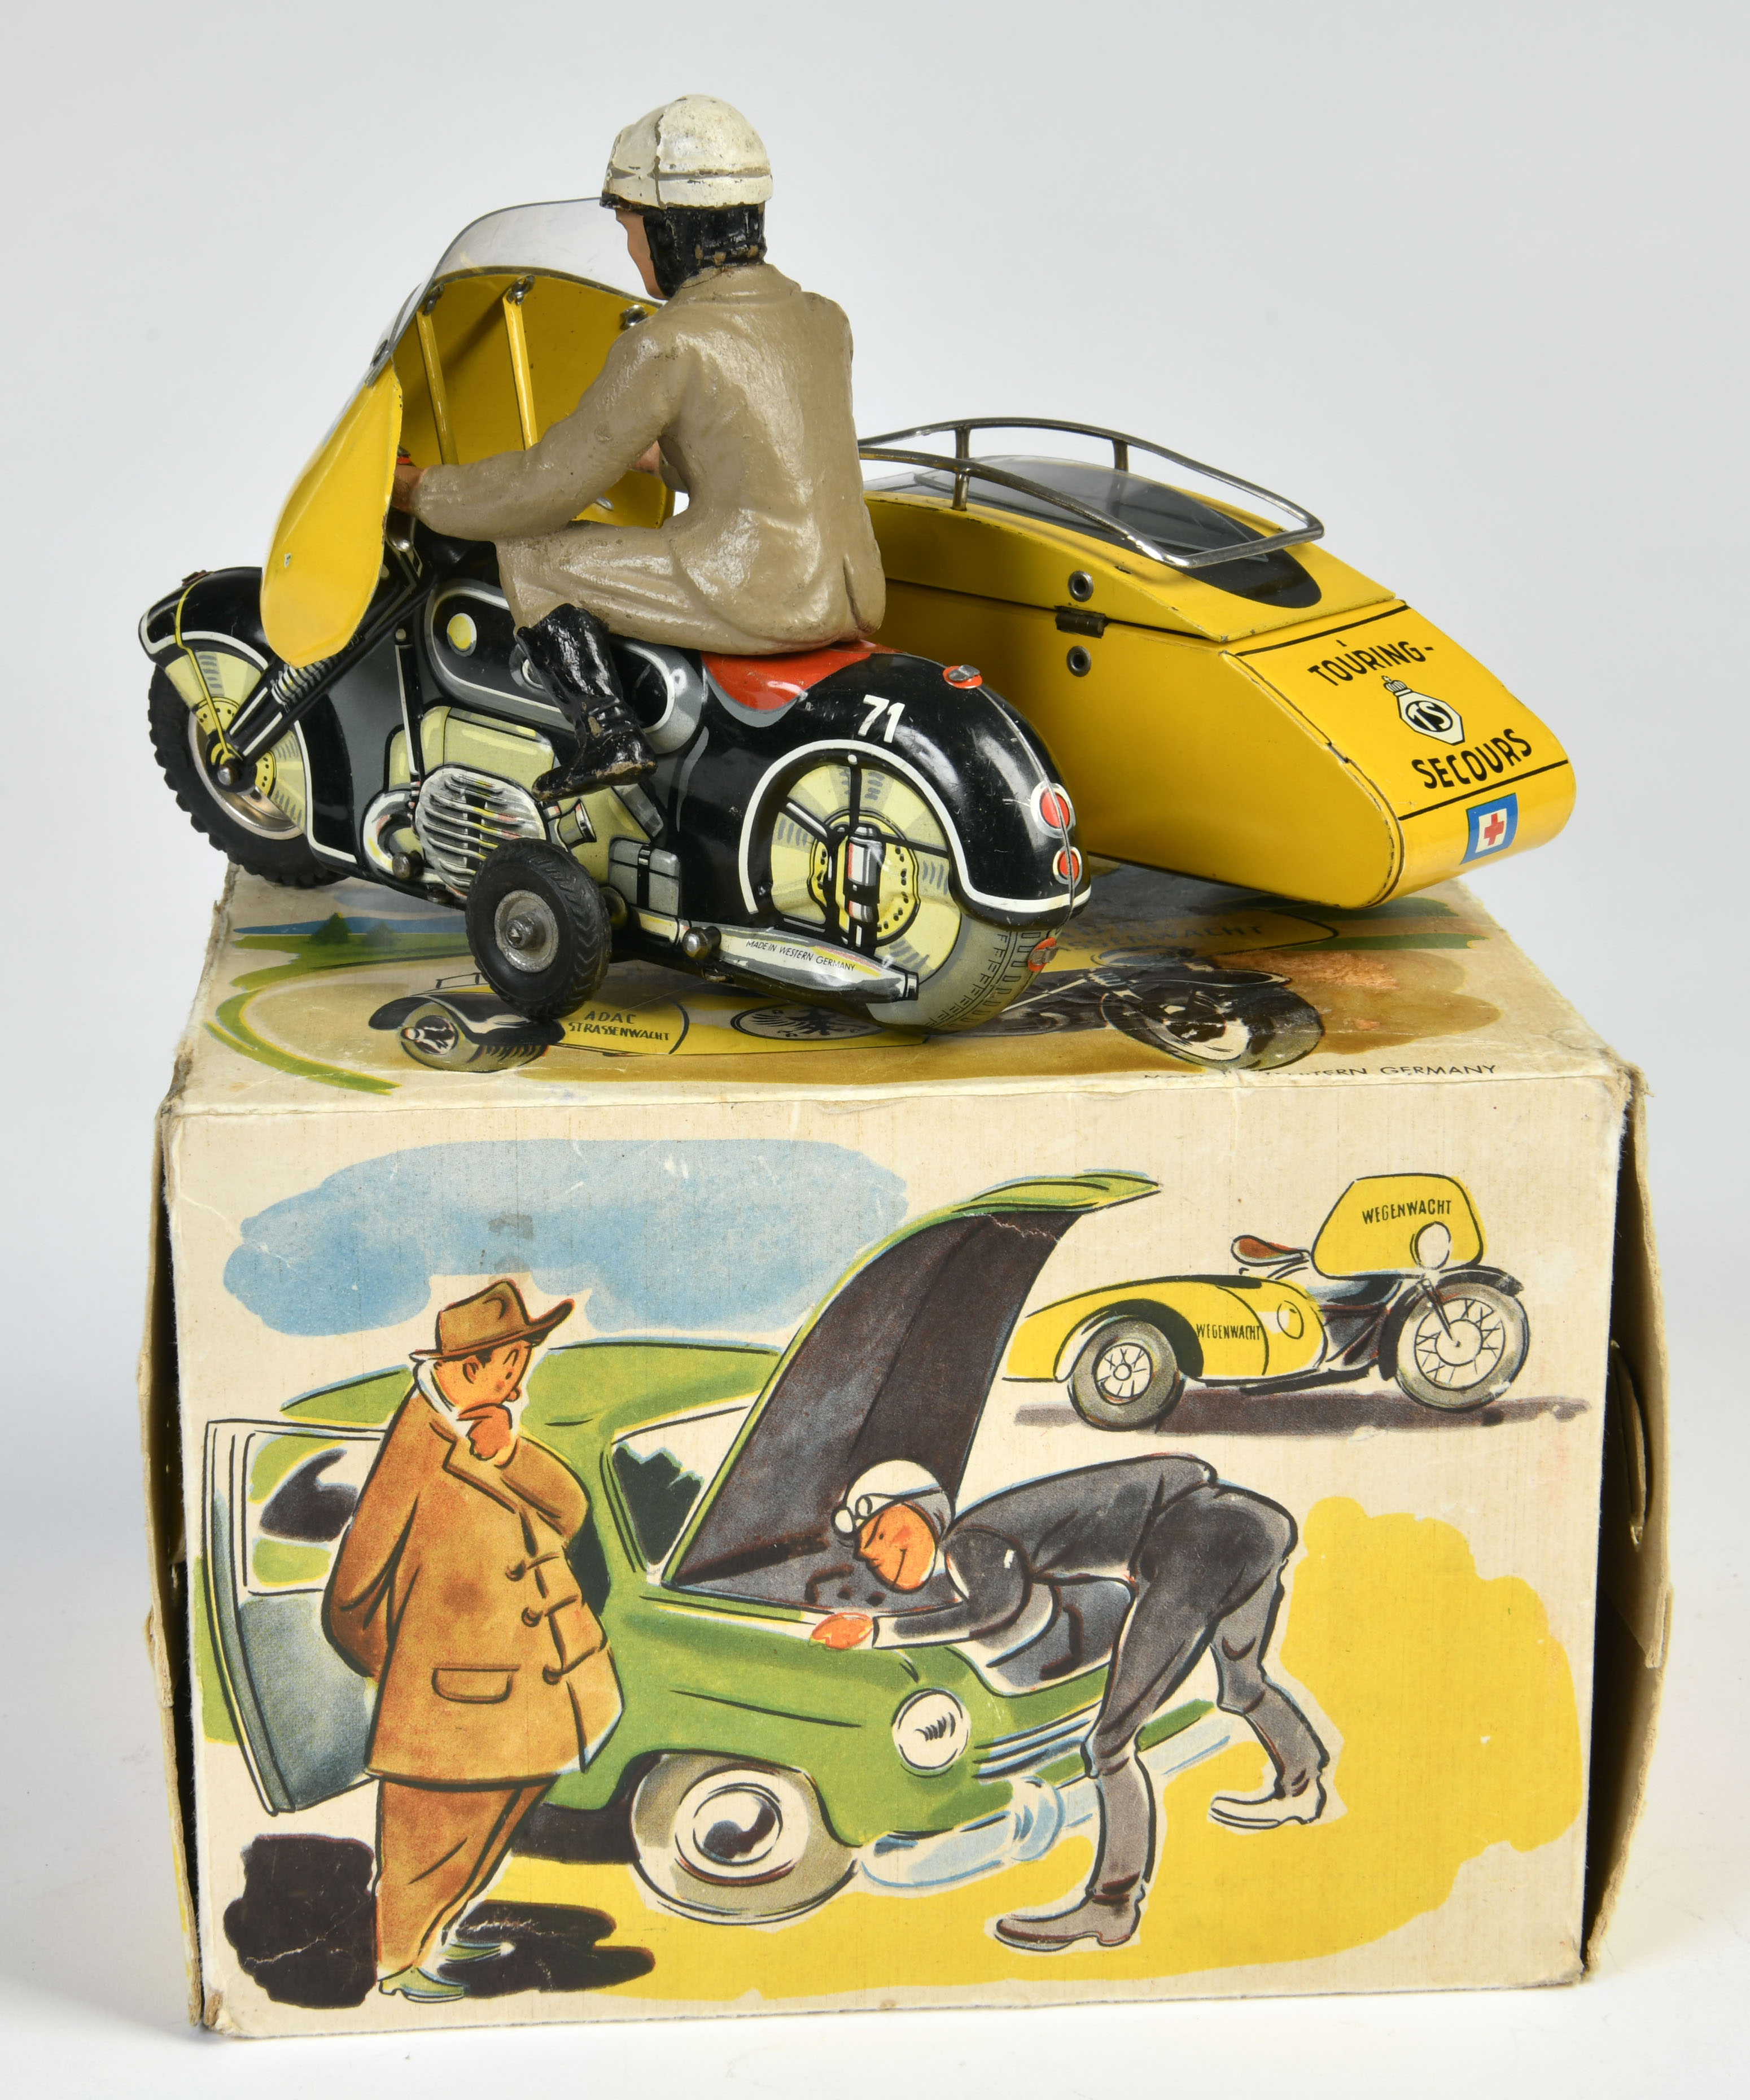 Schuco, driver figure Fritz, Germany pw, 6 cm, C 2 - Image 2 of 3